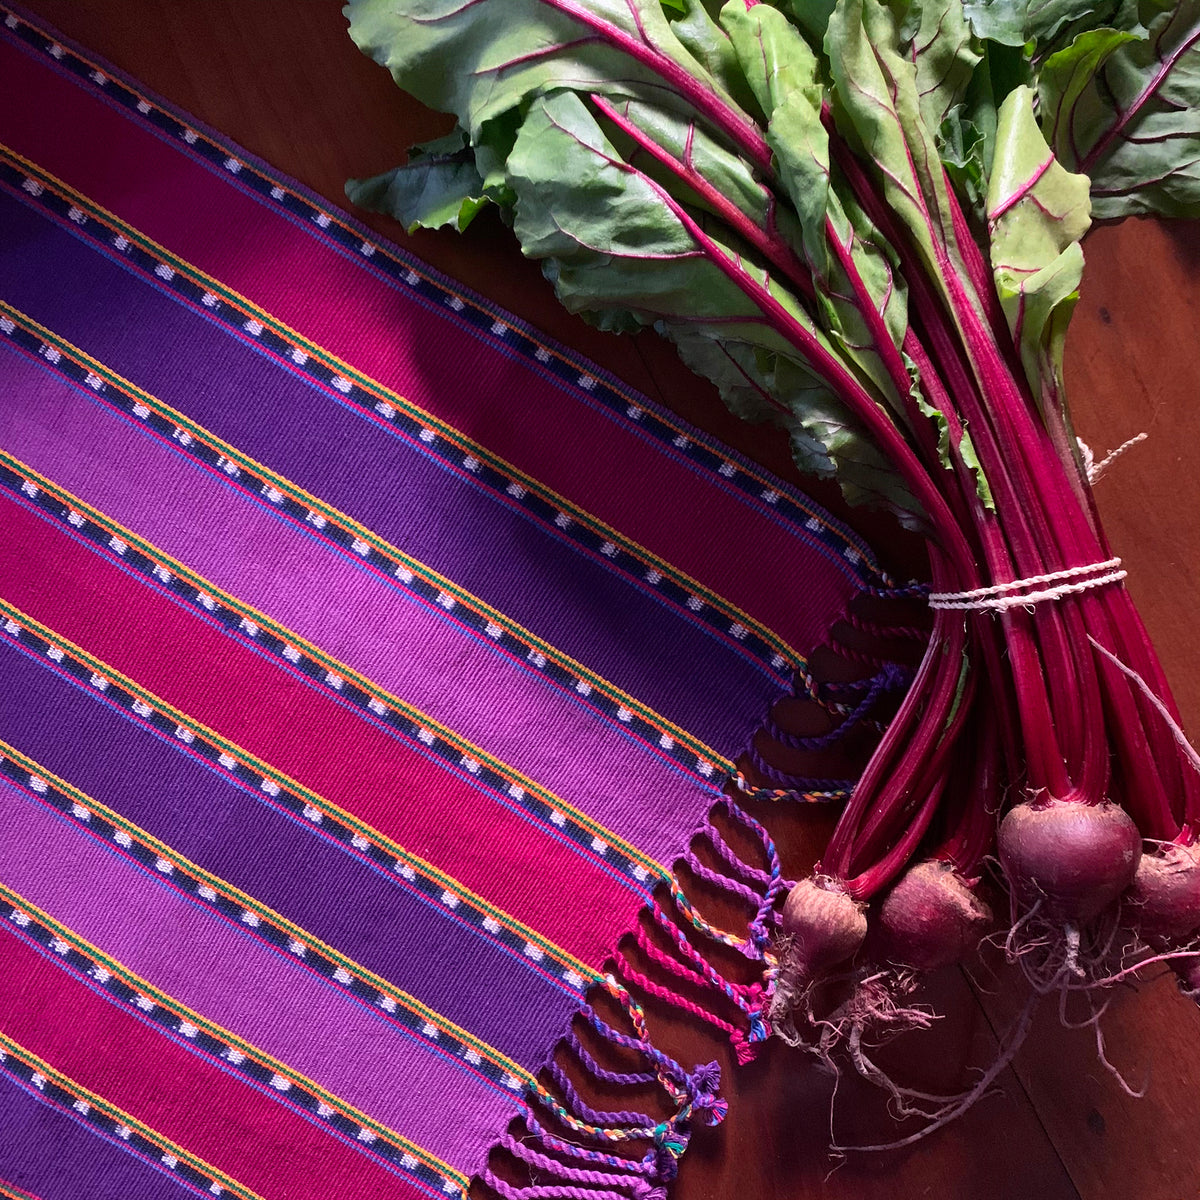 handwoven purple magenta table runner with beets